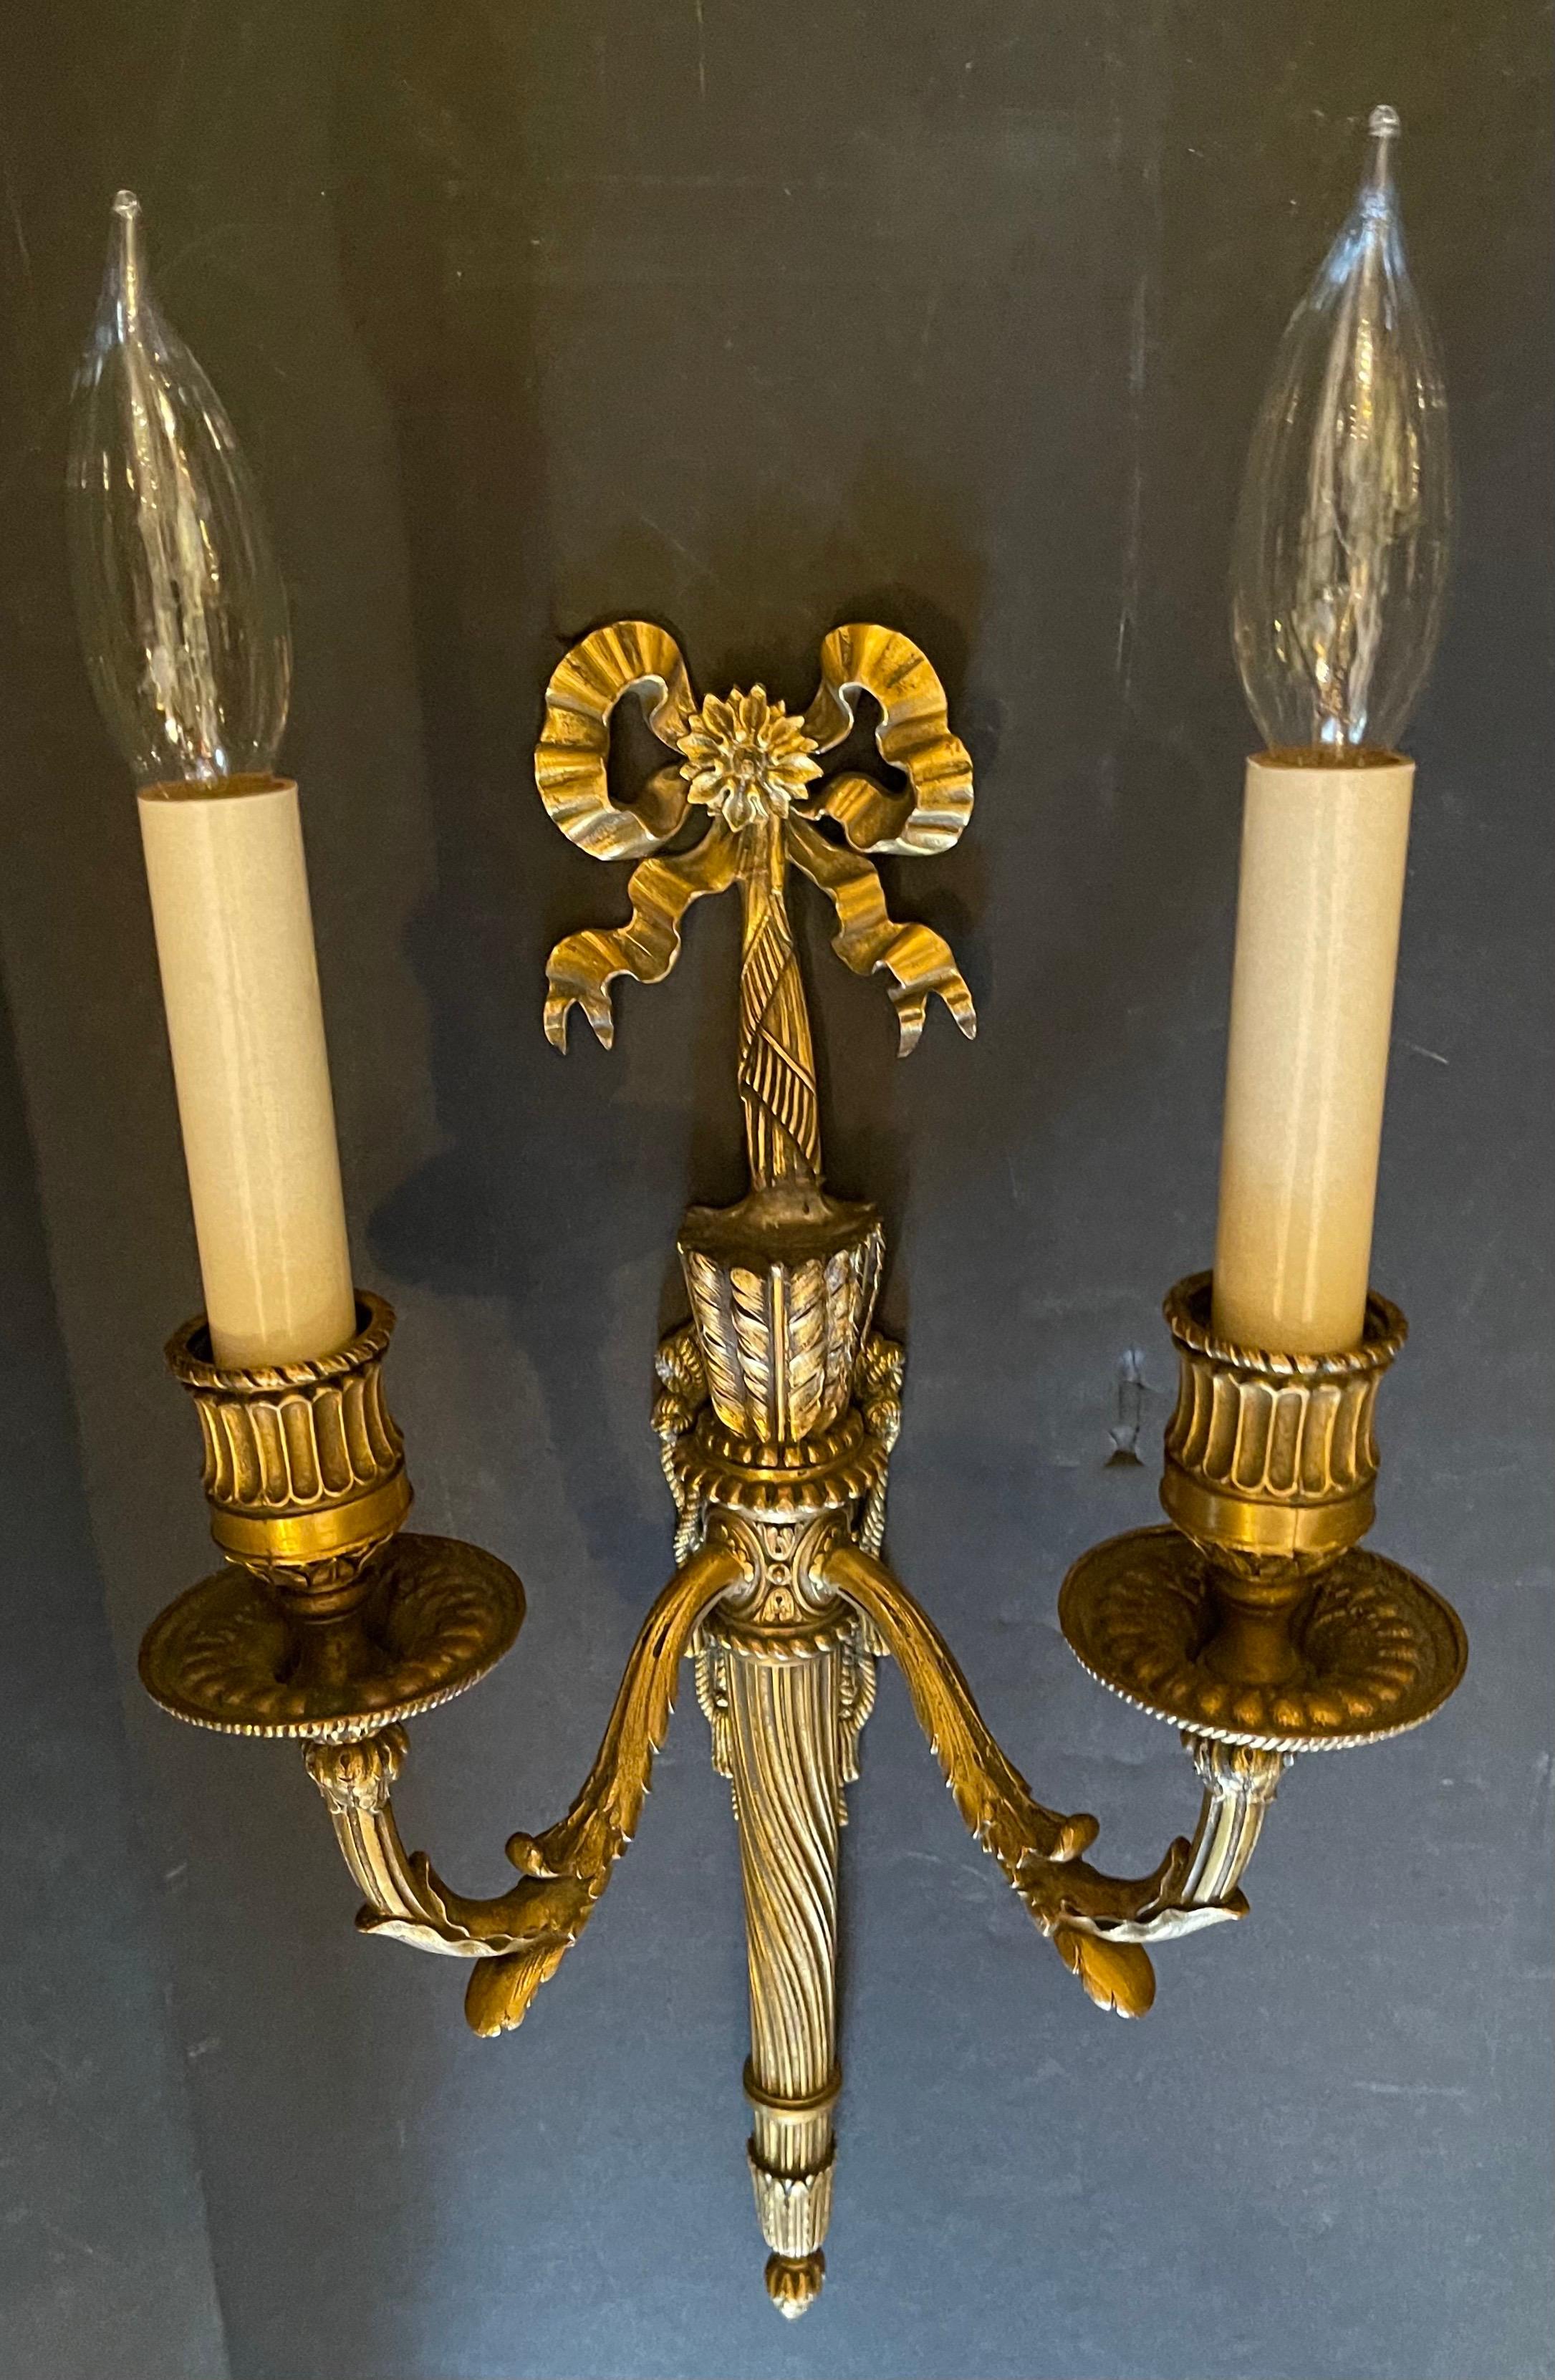 Wonderful Pair French Gilt Doré Bronze Bow Torchiere Caldwell Two-Light Sconces For Sale 2